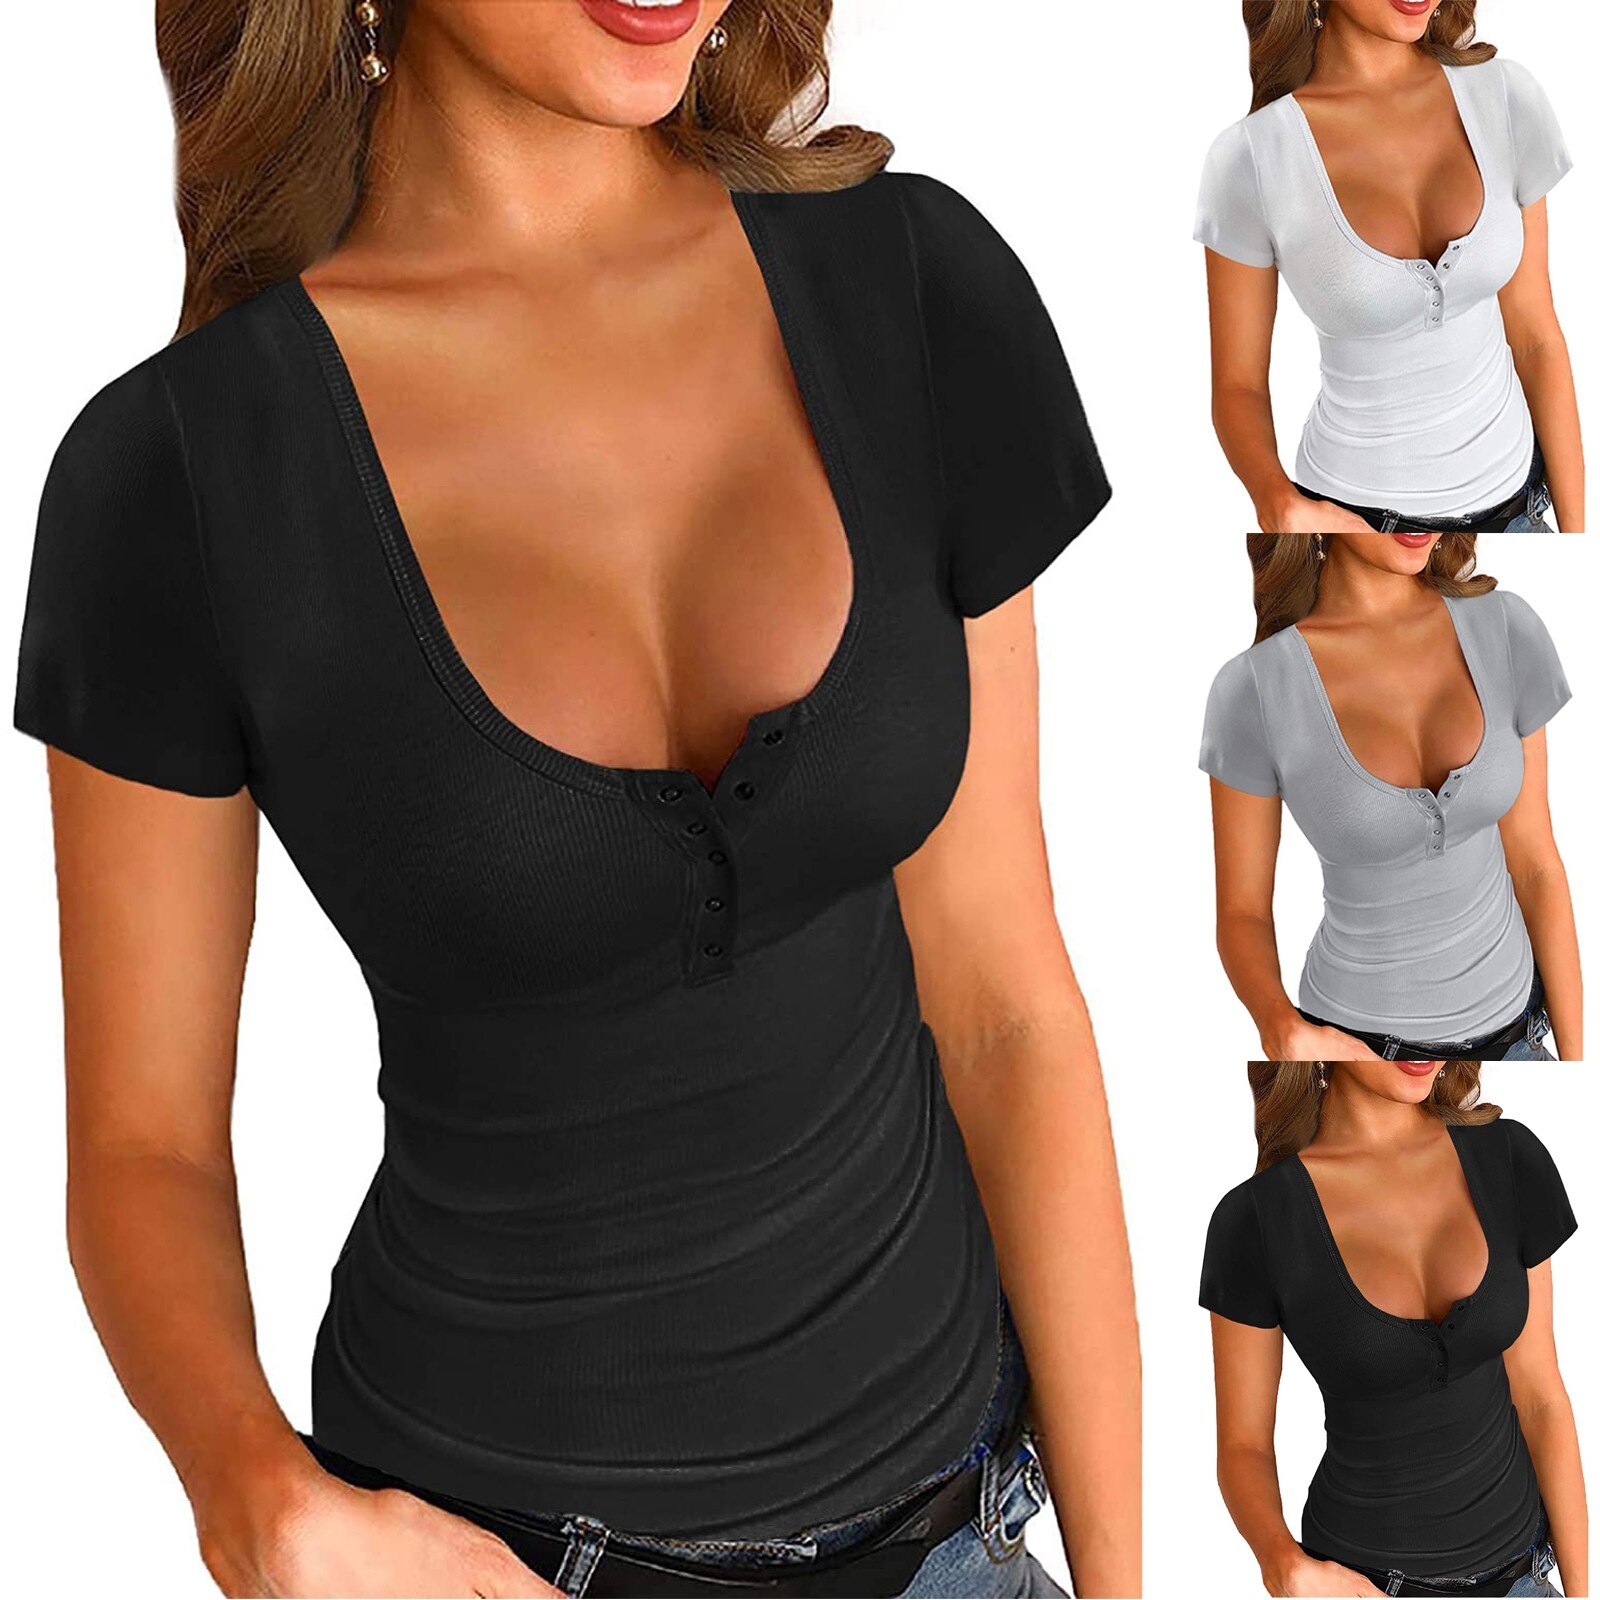 Womens Basic Sexy Low Cut Tshirts Button Short Sleeve Down Tight Slim Fitted Bodycon Tee Tops T Shirts Women Clothing